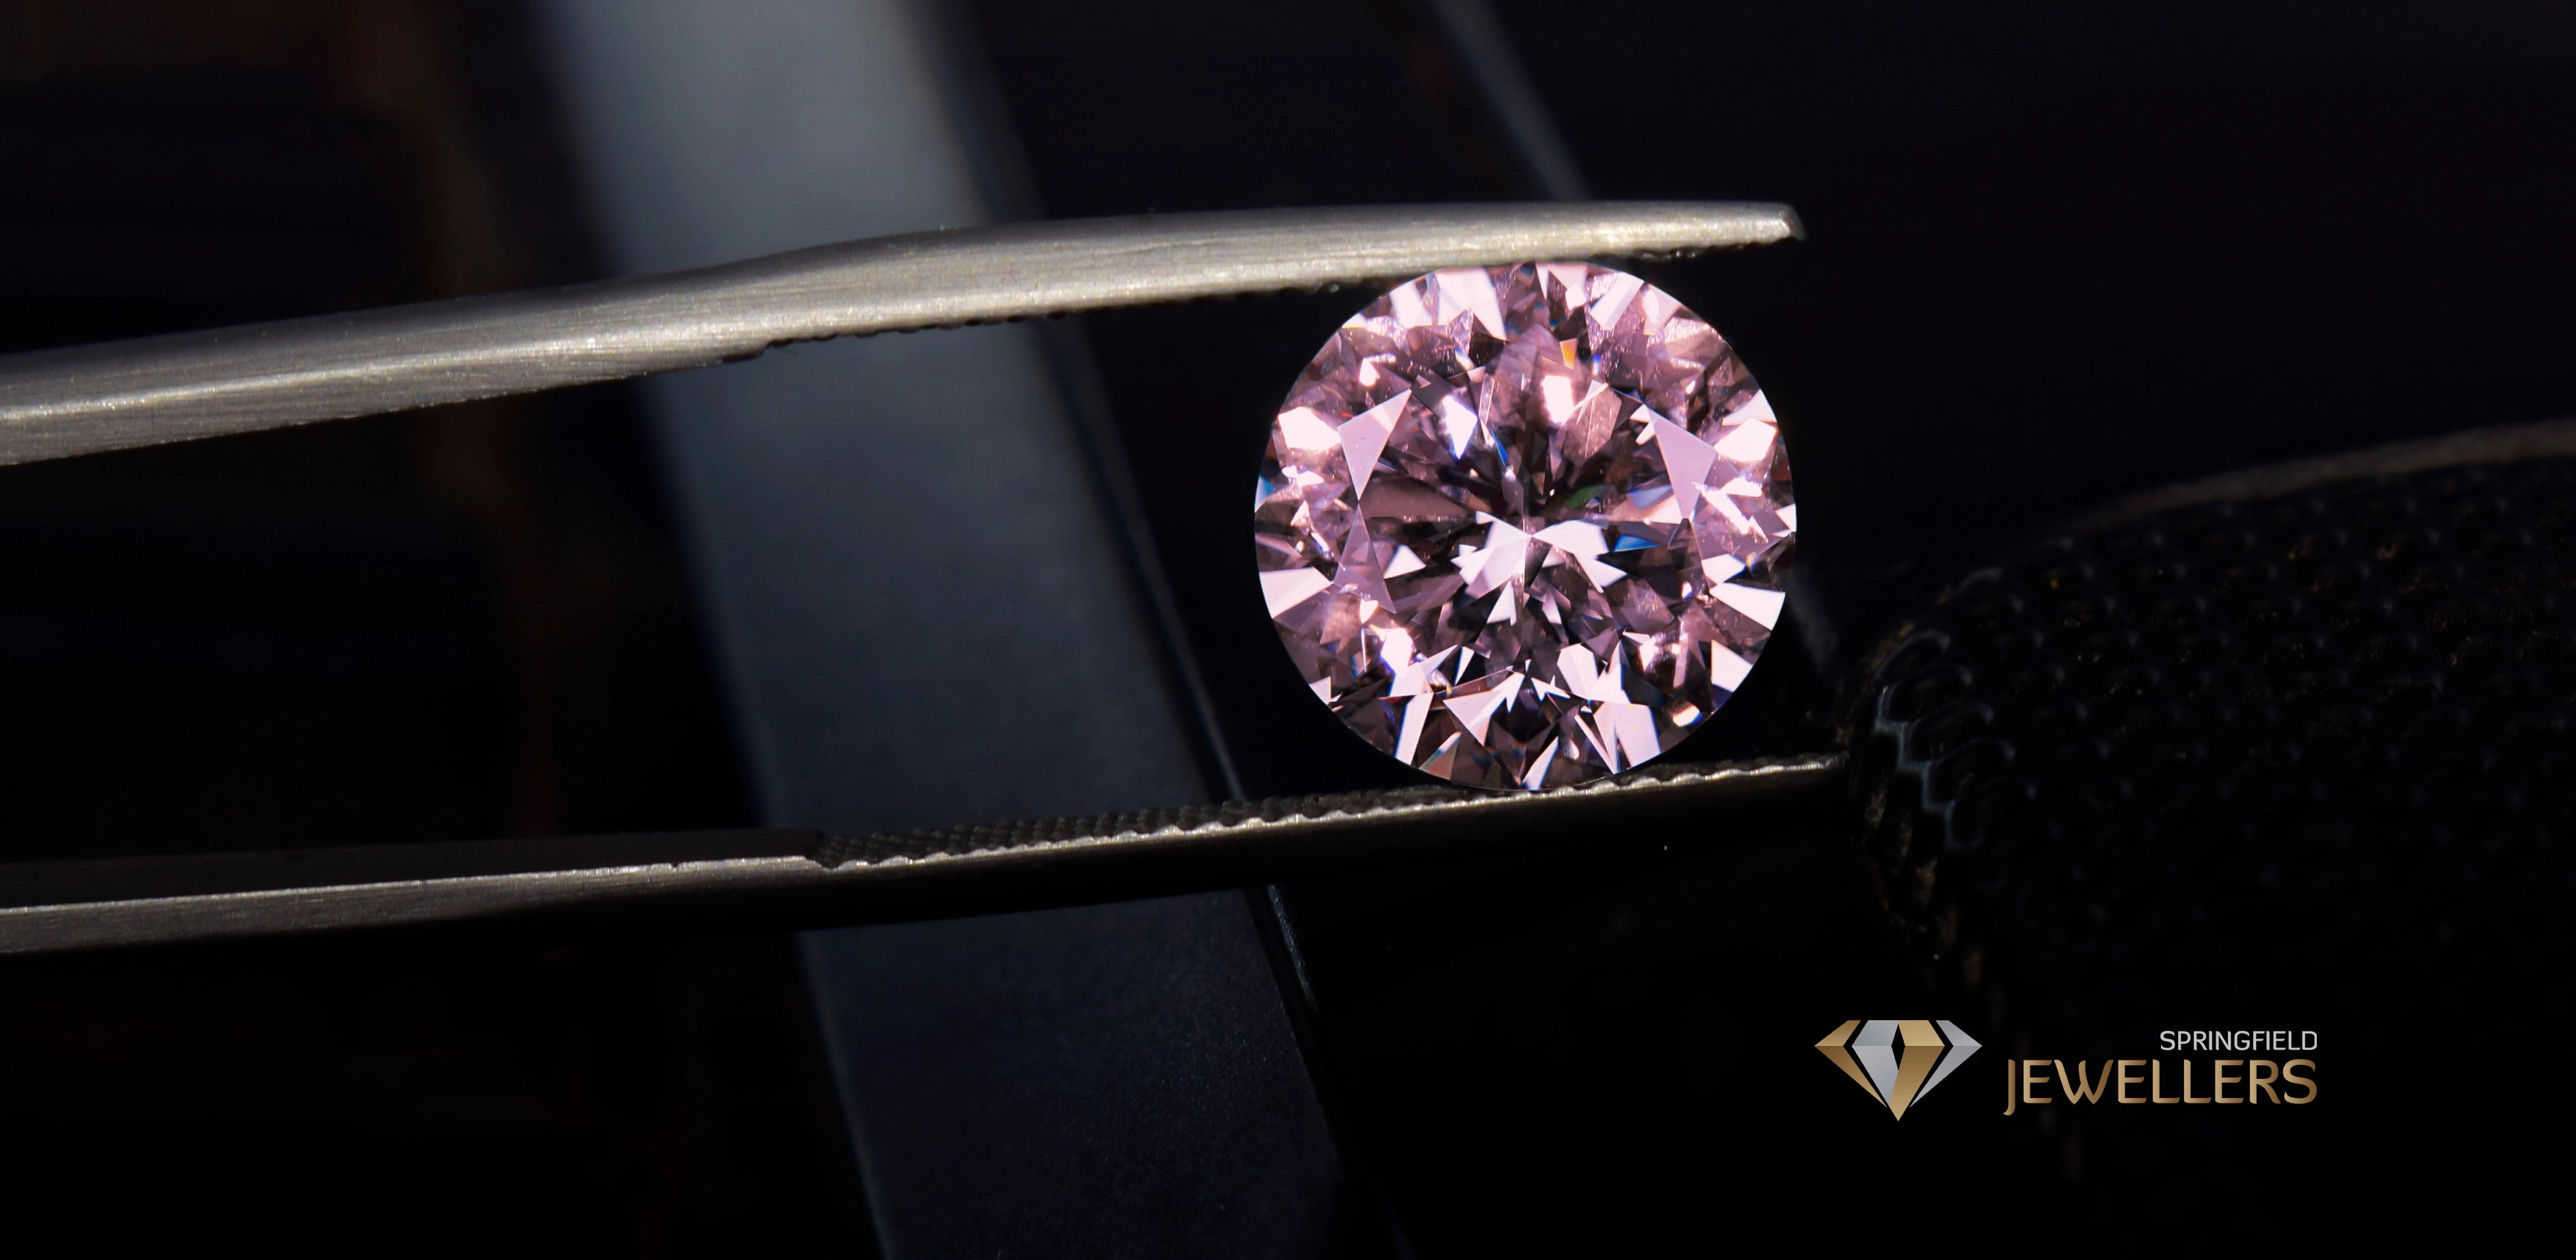 All about the argyle pink diamonds